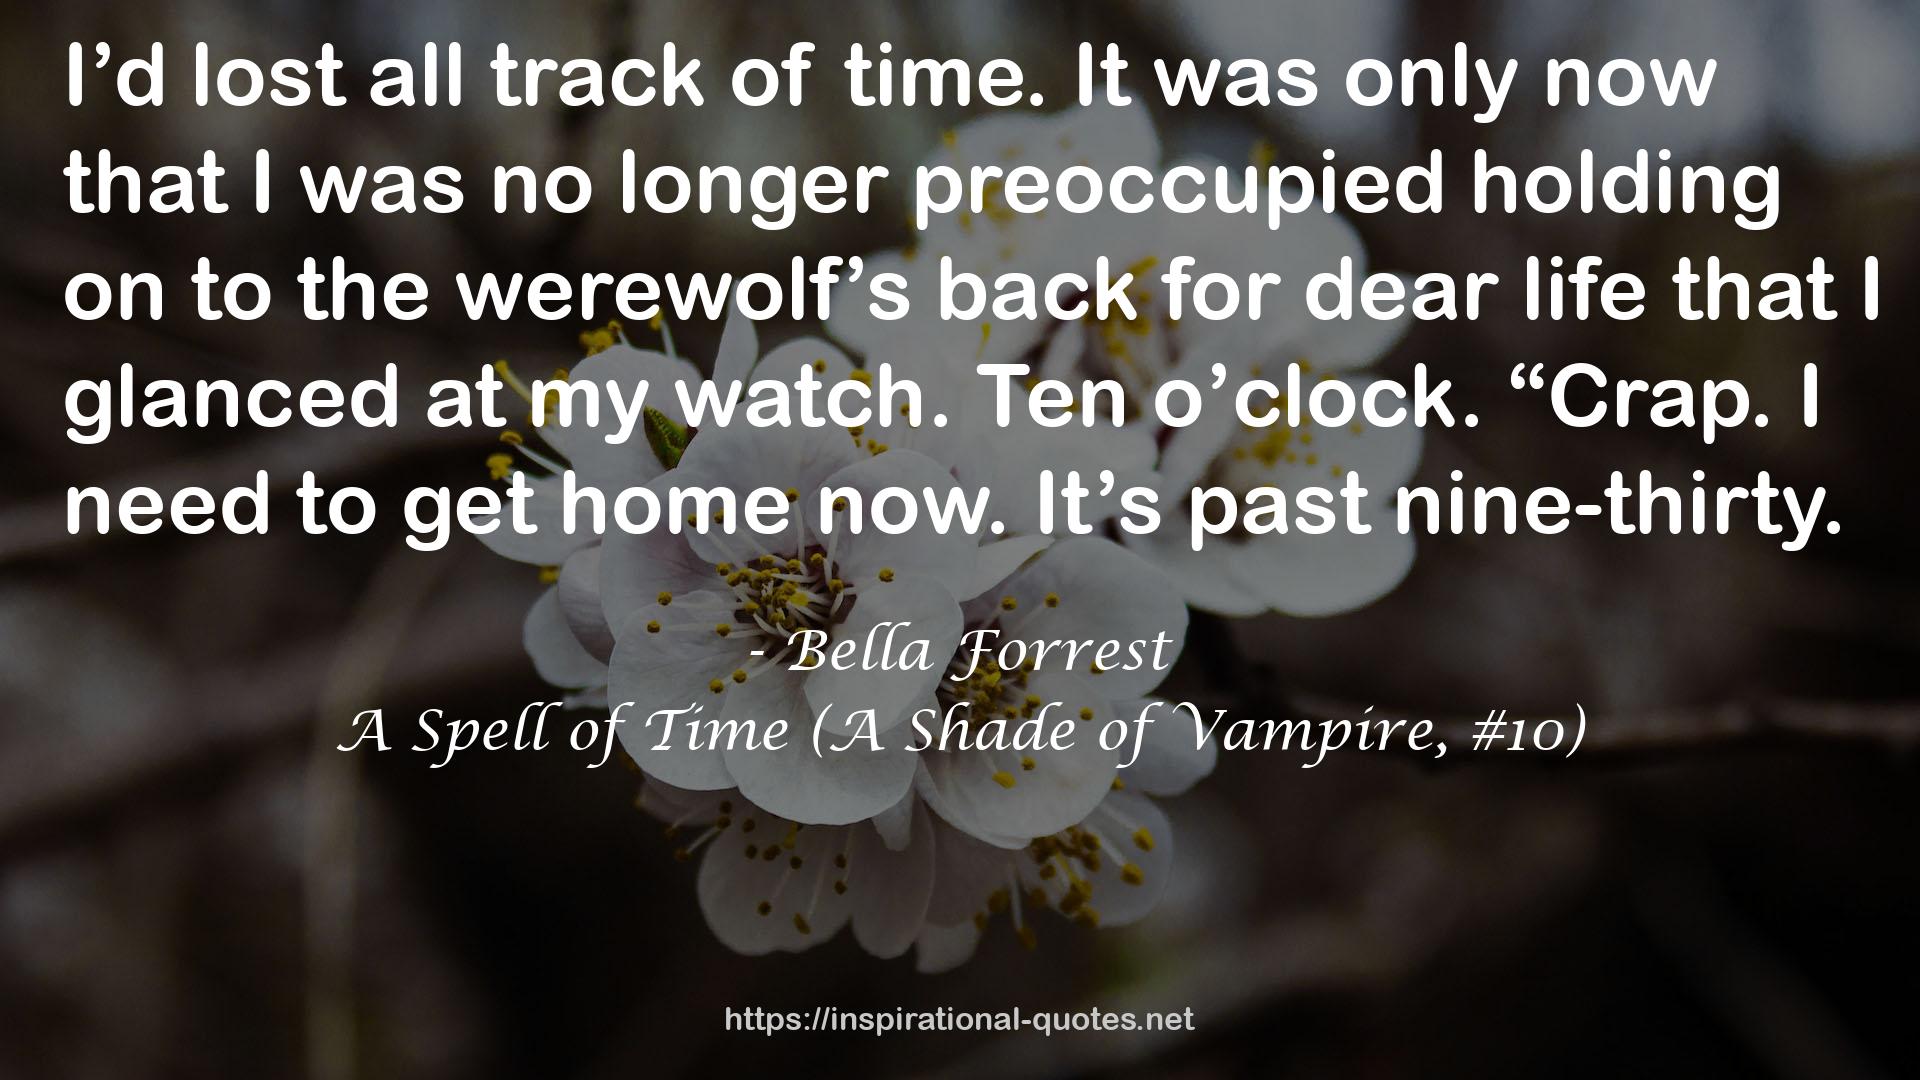 A Spell of Time (A Shade of Vampire, #10) QUOTES